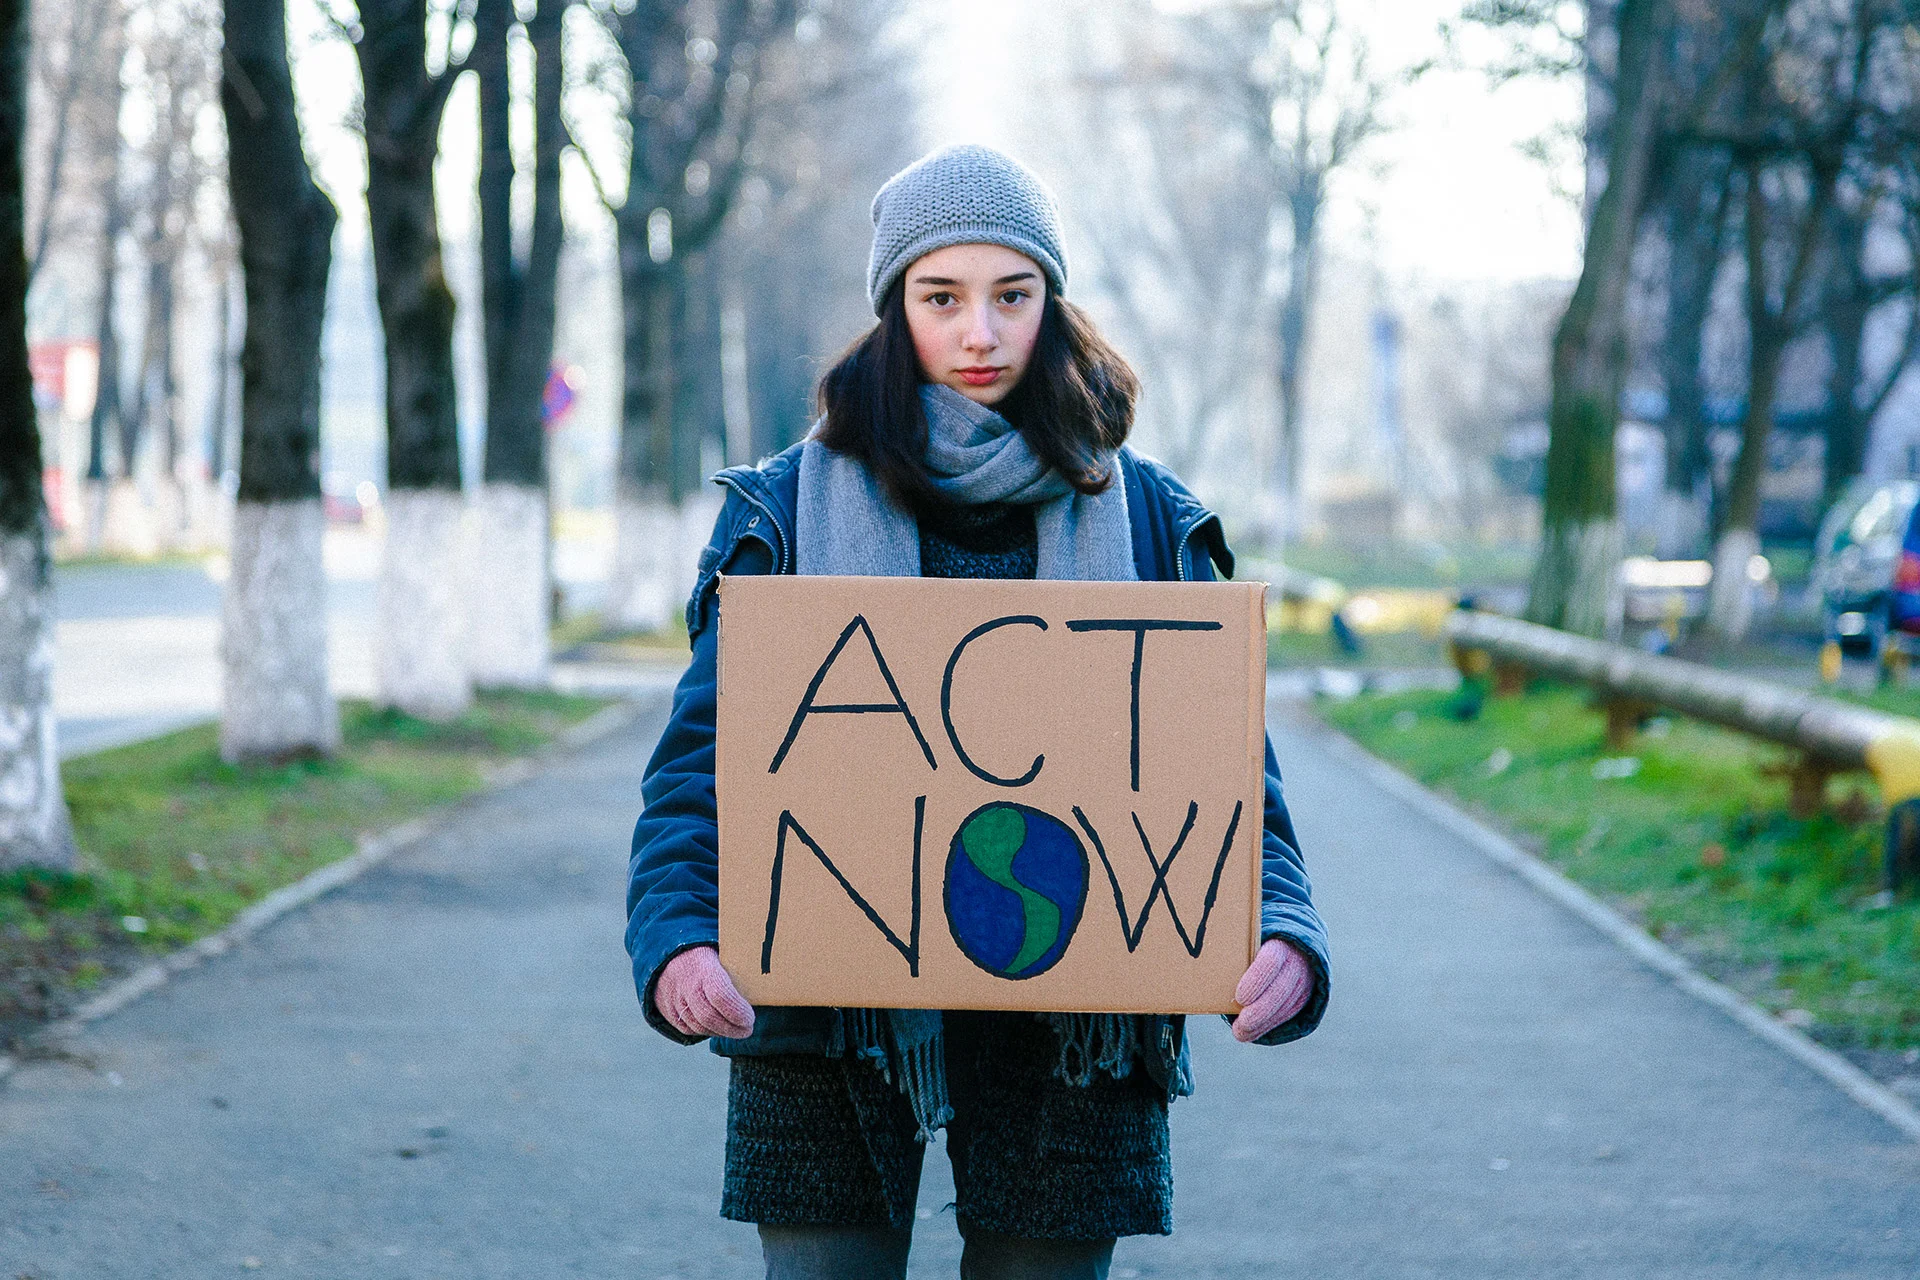 Portrait of a young teenage girl activist holding a sign protesting against climate change and global warming. (coldsnowstorm/ E+/ Getty Images)